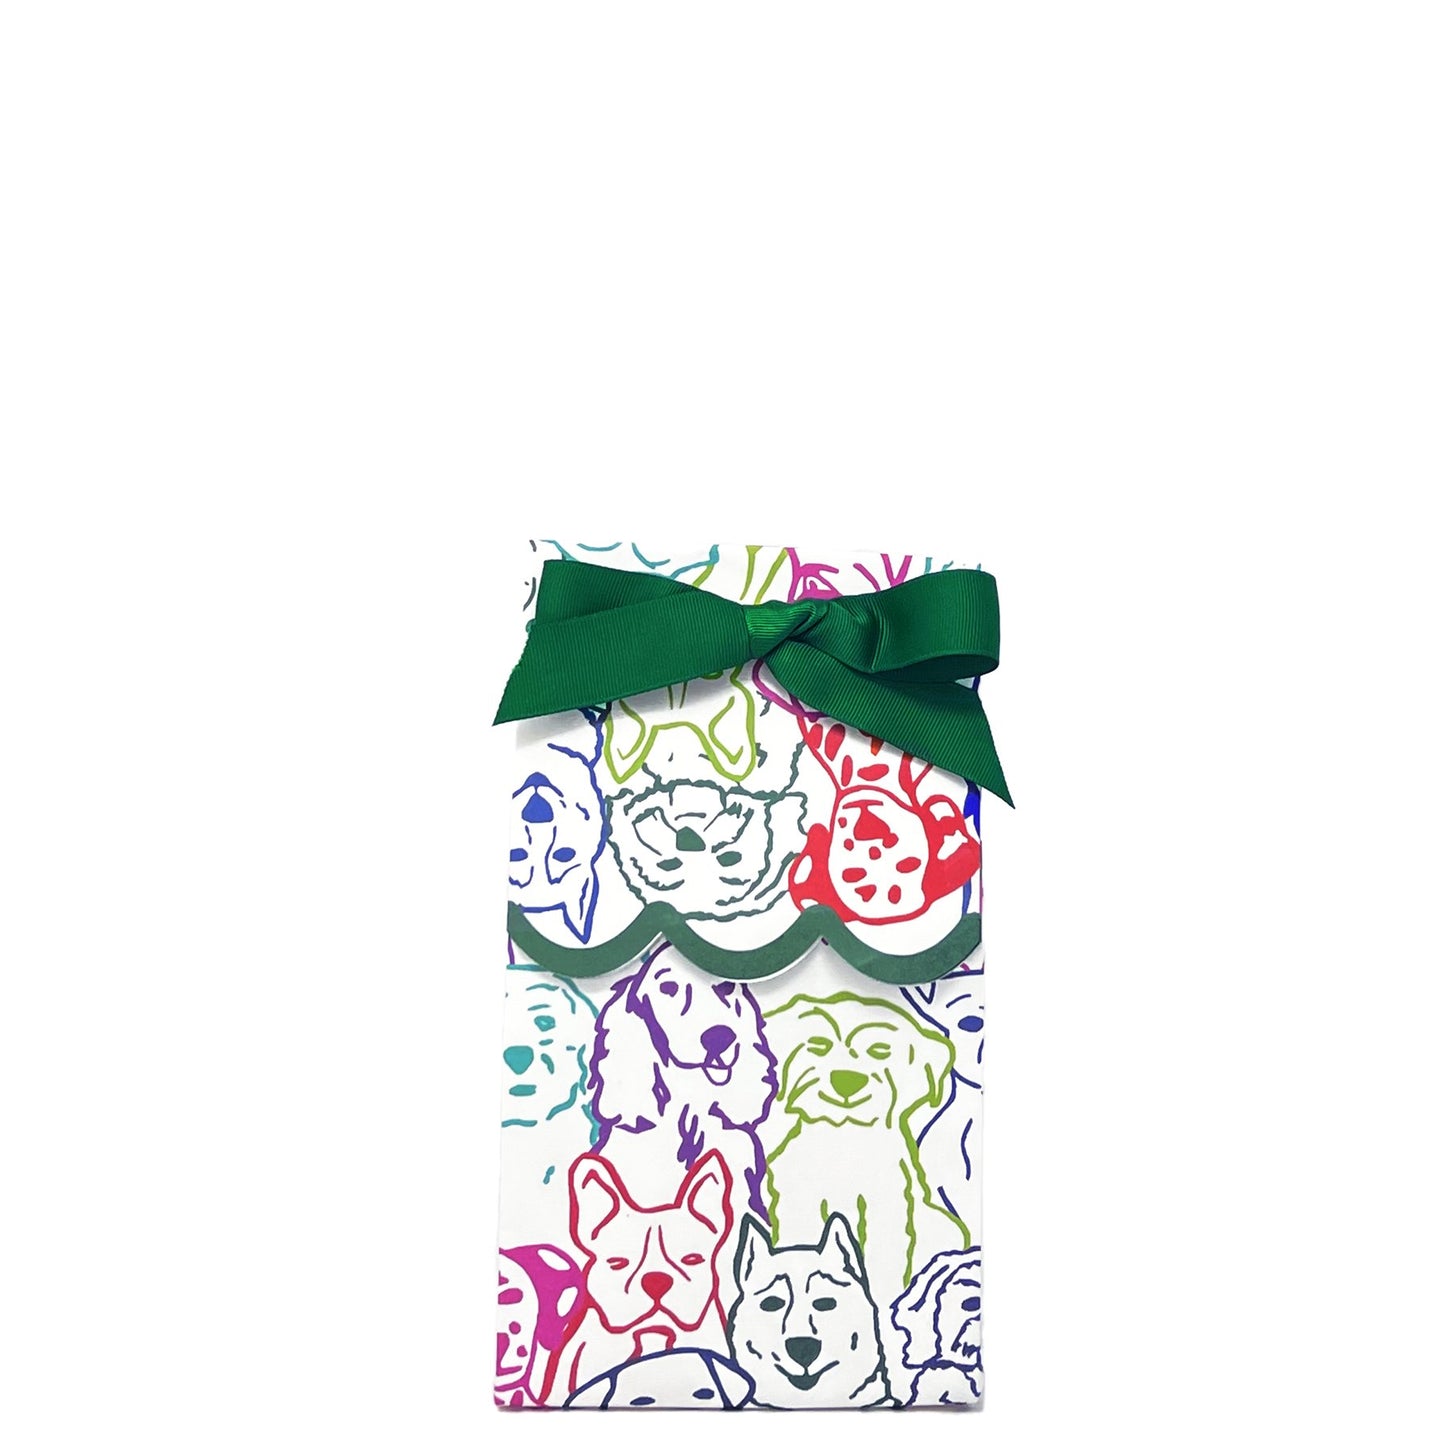 Paper wine bag featuring multicolored dogs tied as a gift bag with a green bow